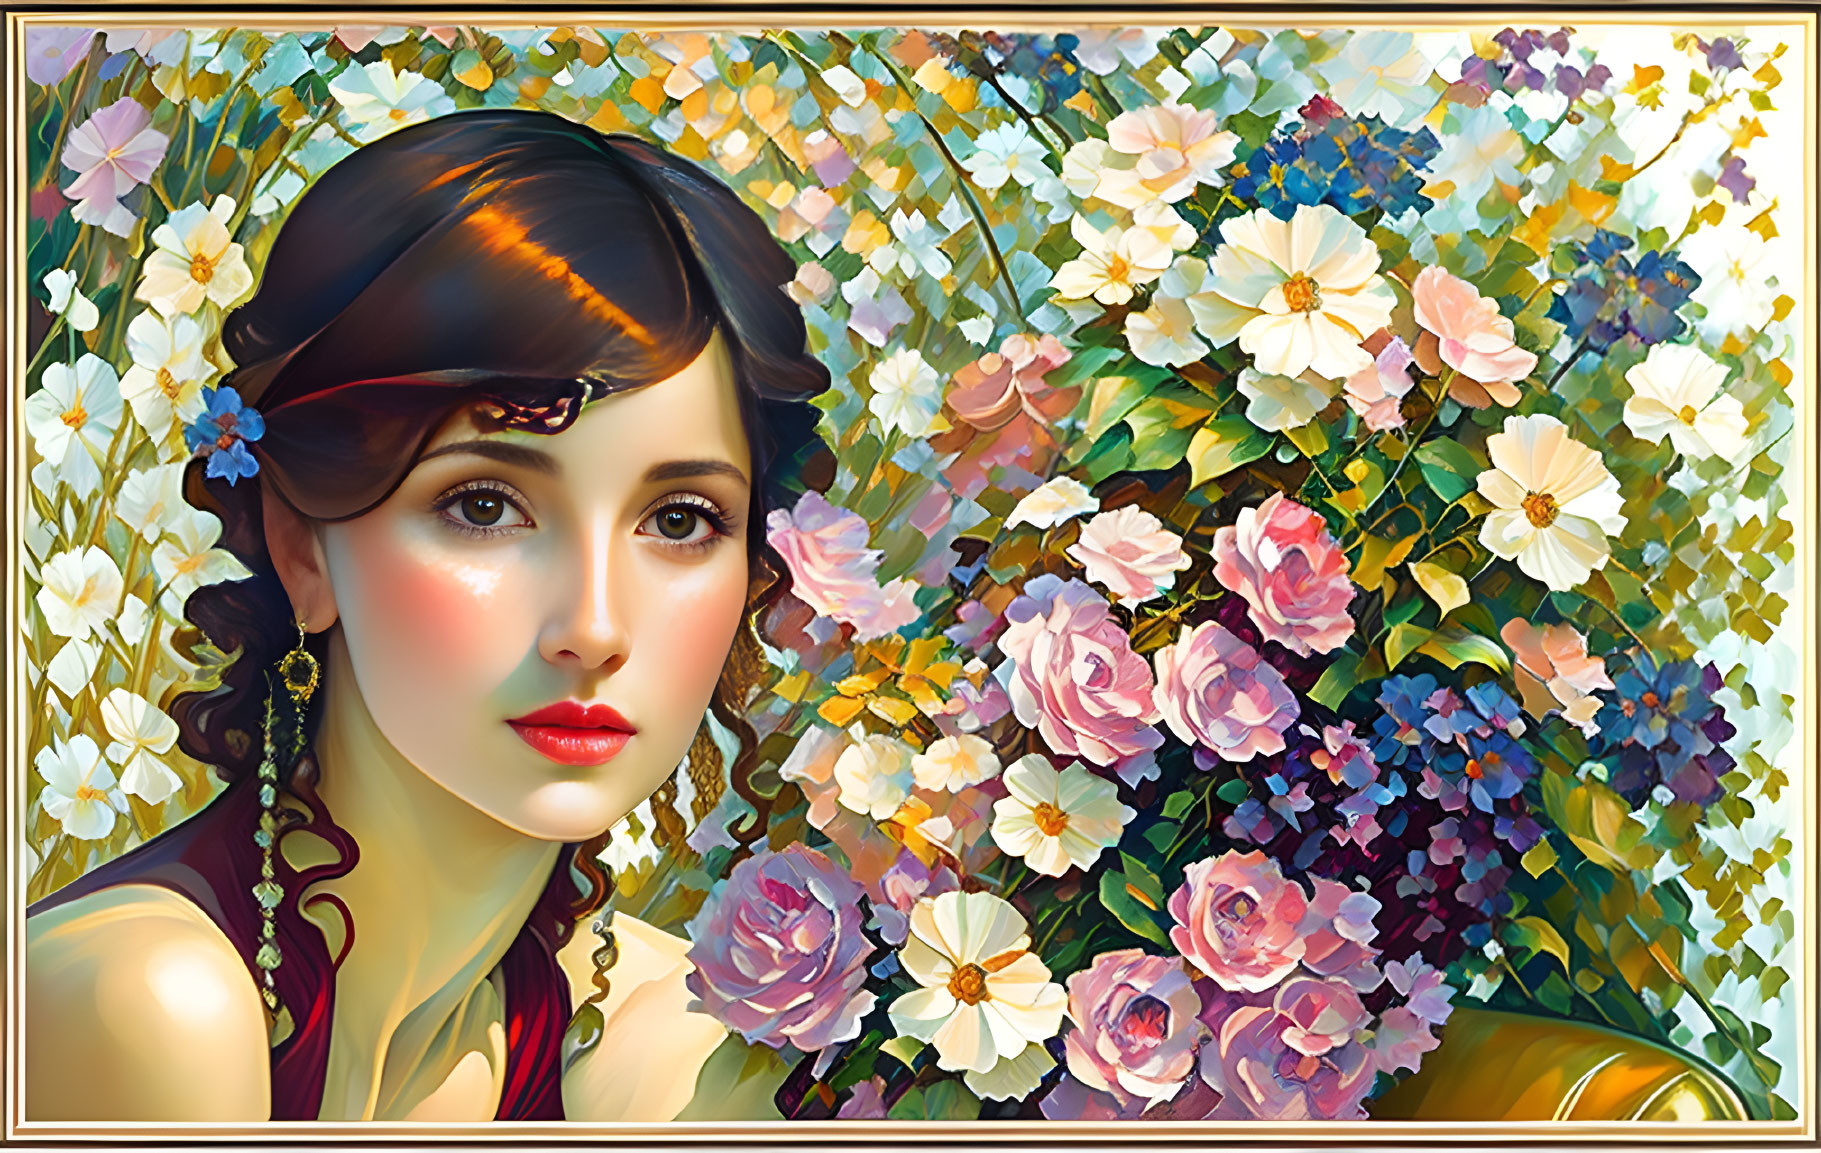 Portrait of Woman with Dark Hair and Red Lips Surrounded by Colorful Flowers